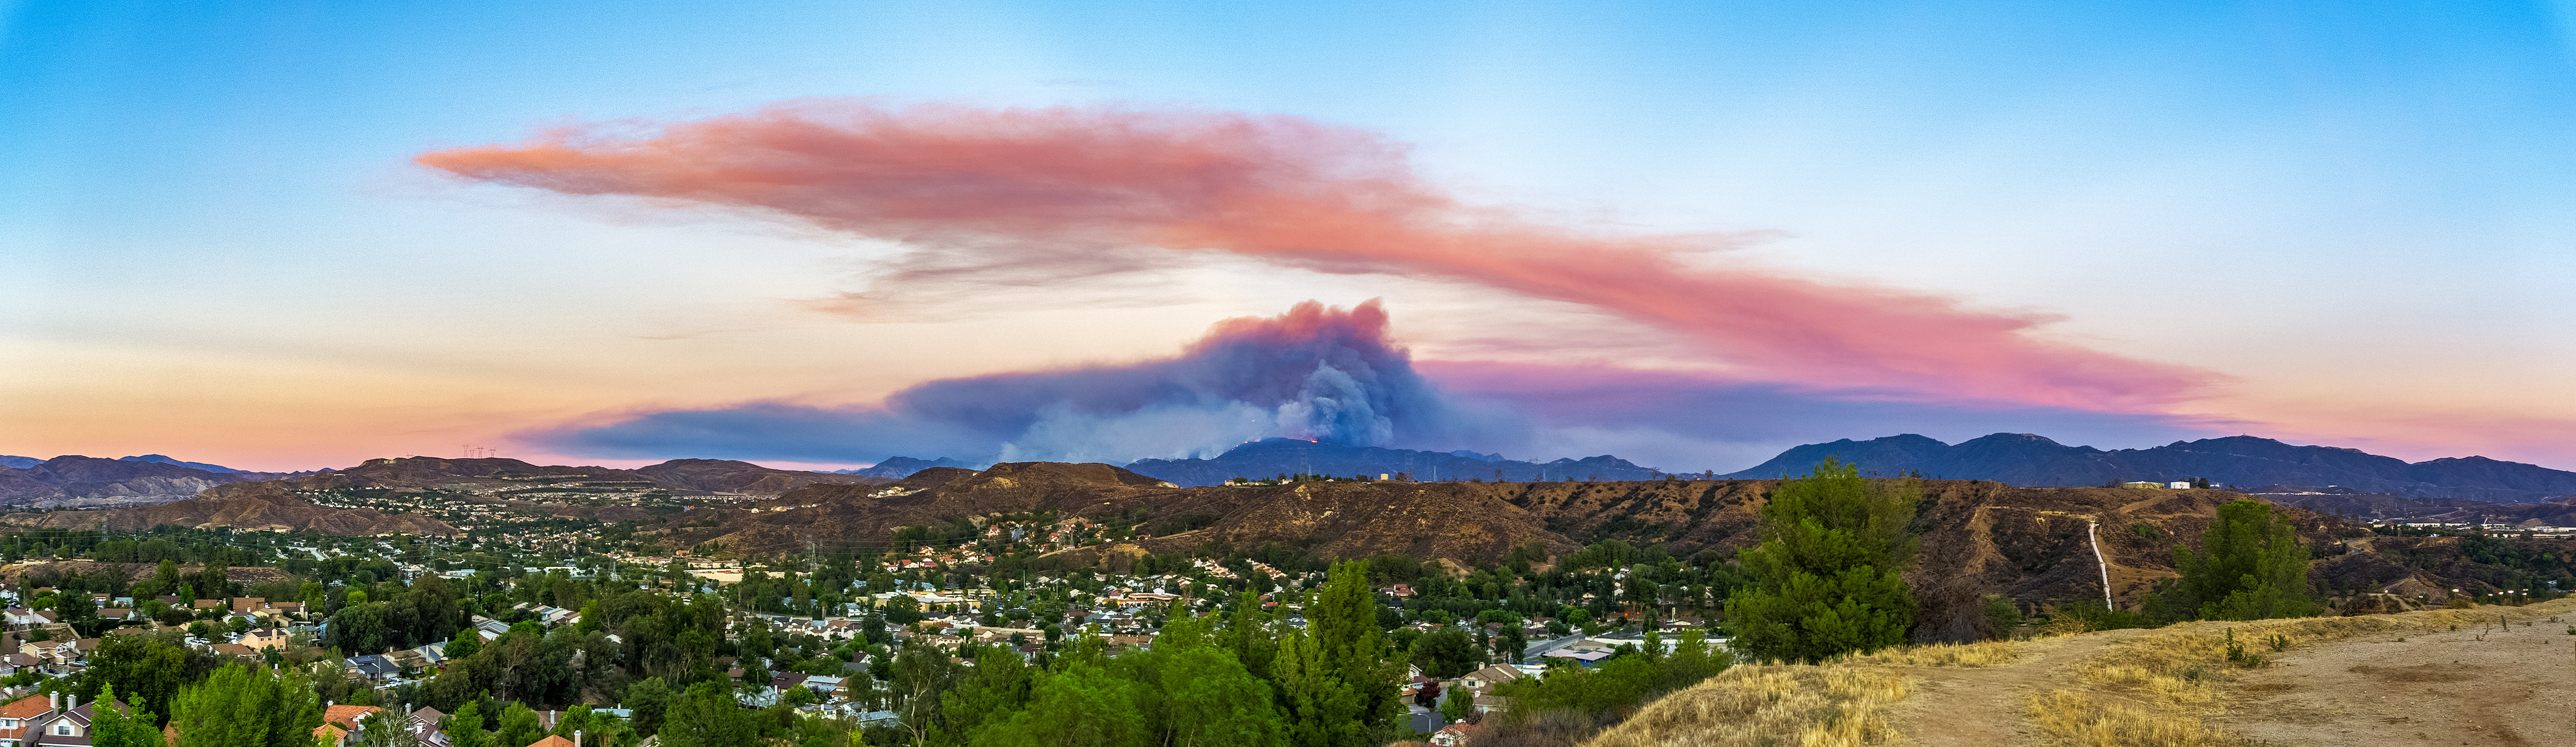 Sand Fire At Sunset Pano